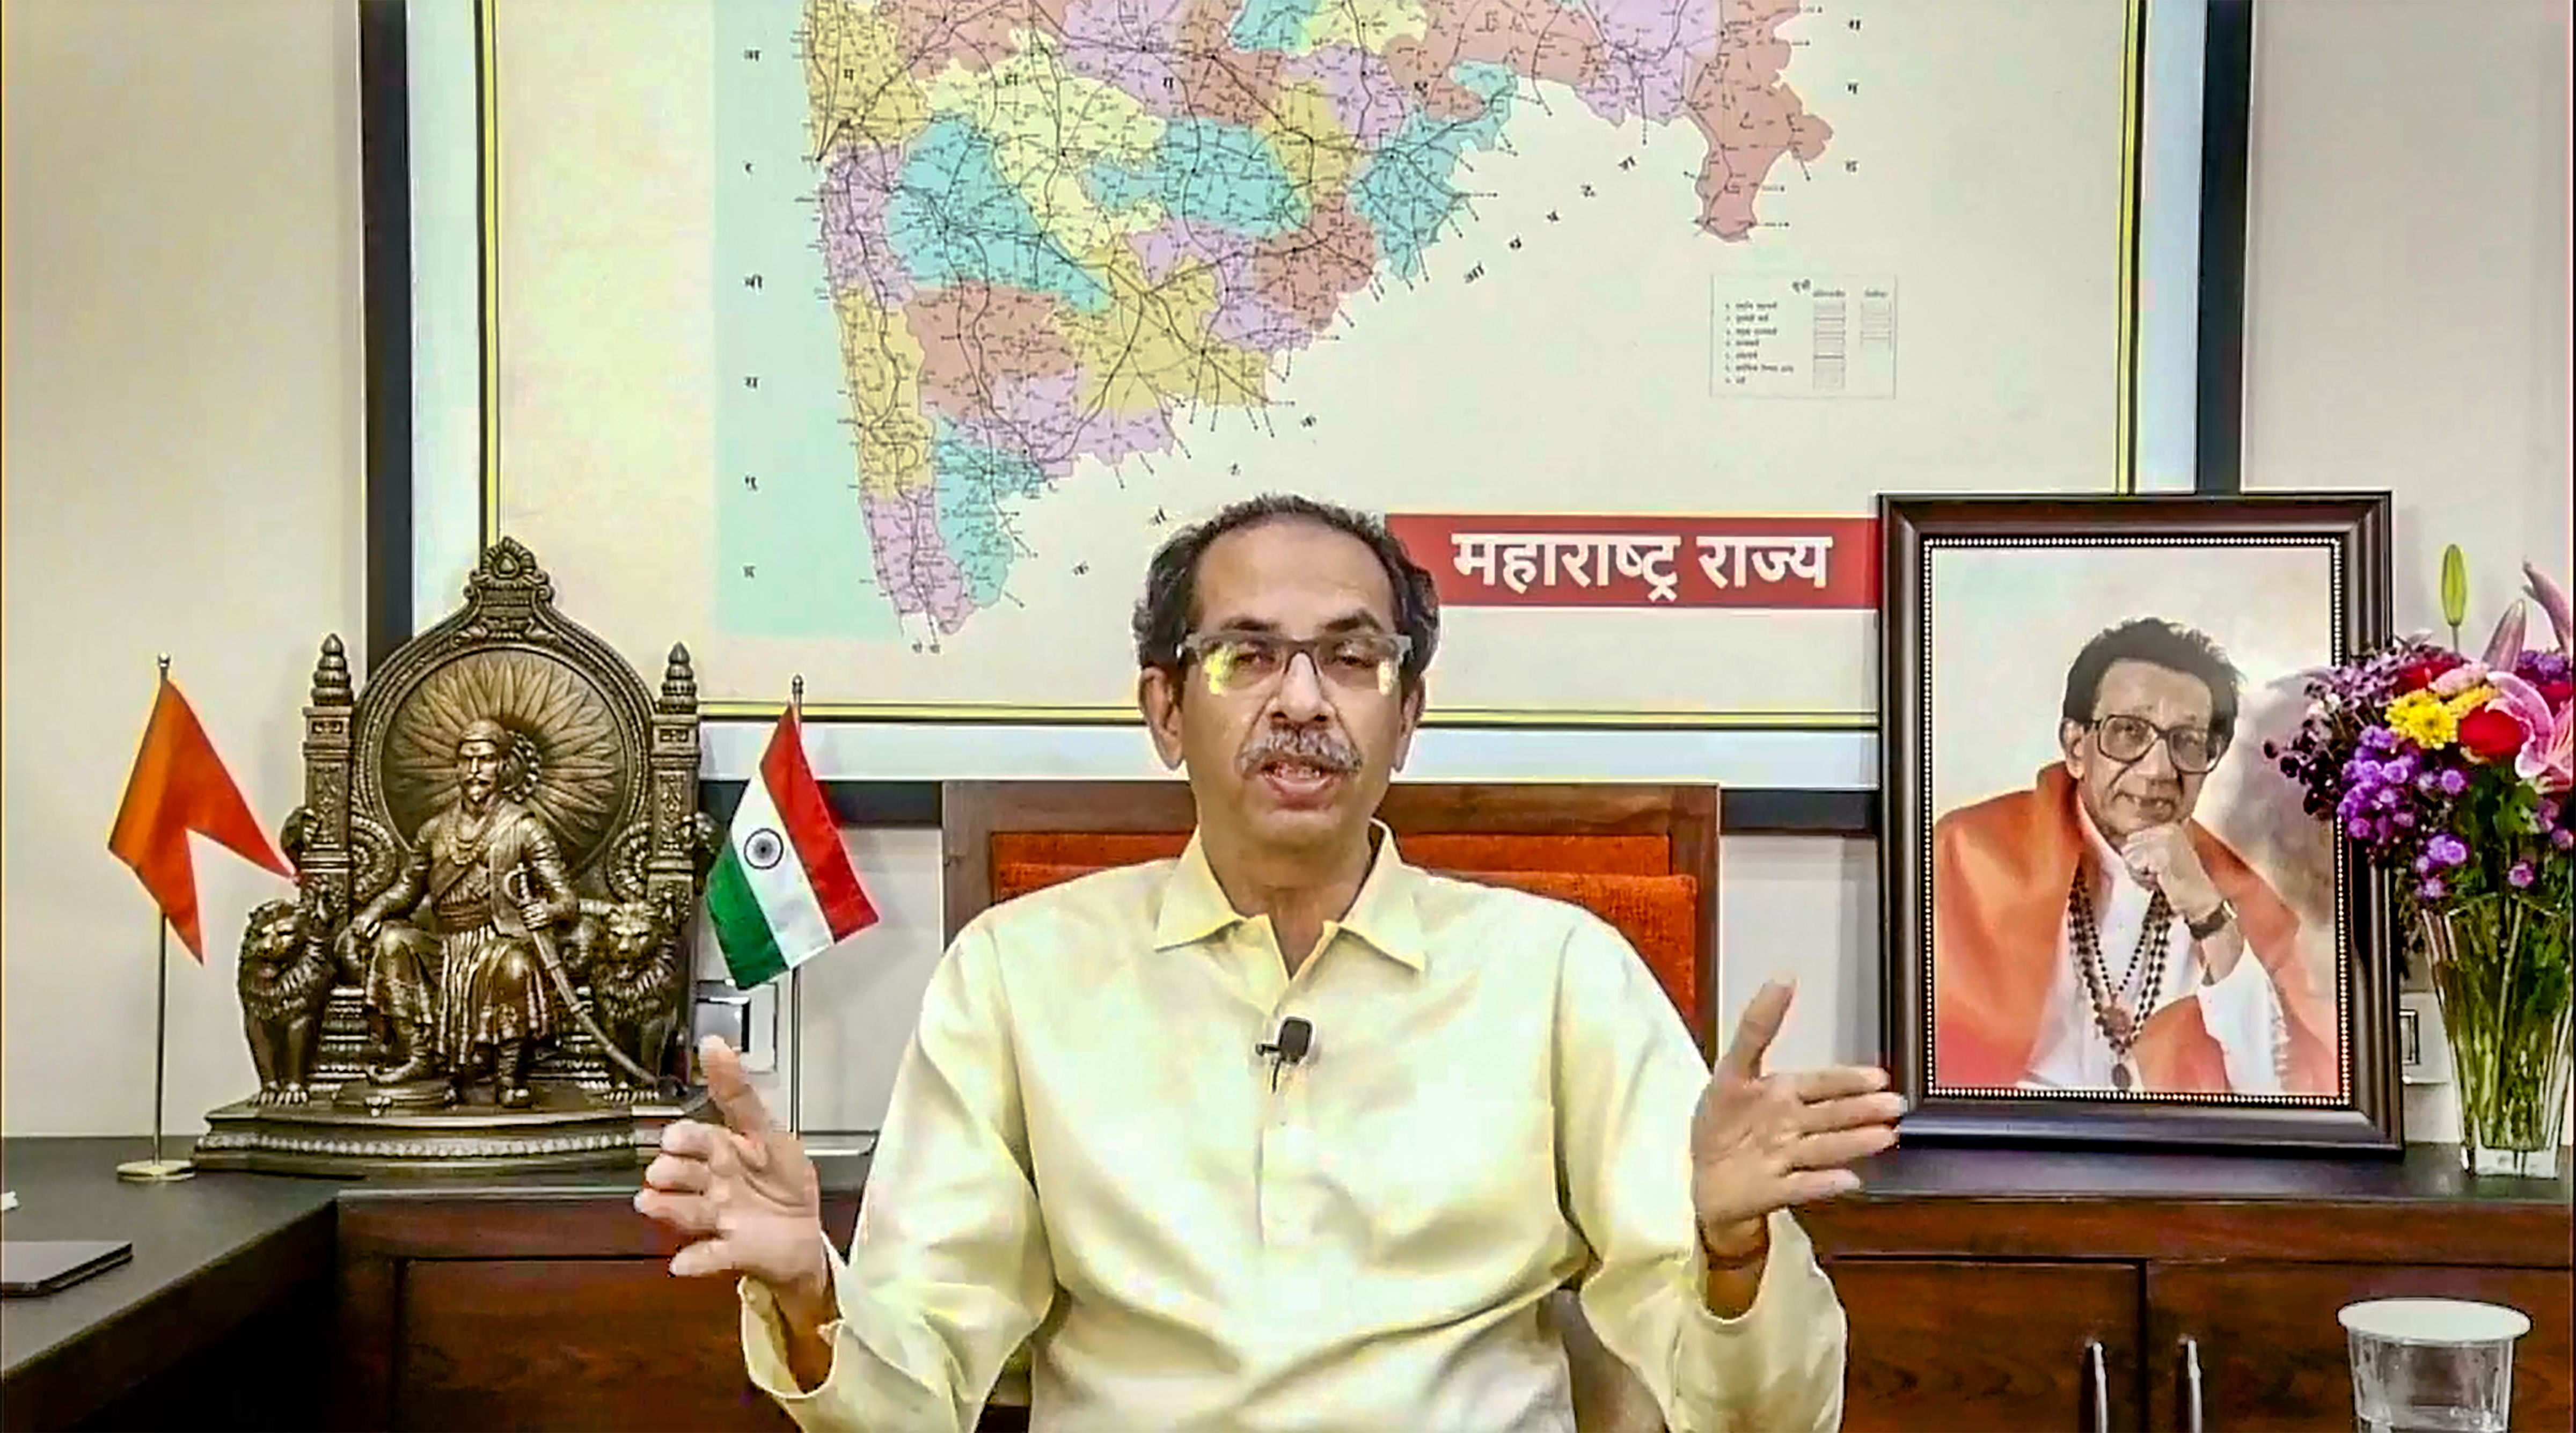 We have been betrayed by our own people, says Maharashtra CM Uddhav Thackeray on rebellion in Shiv Sena